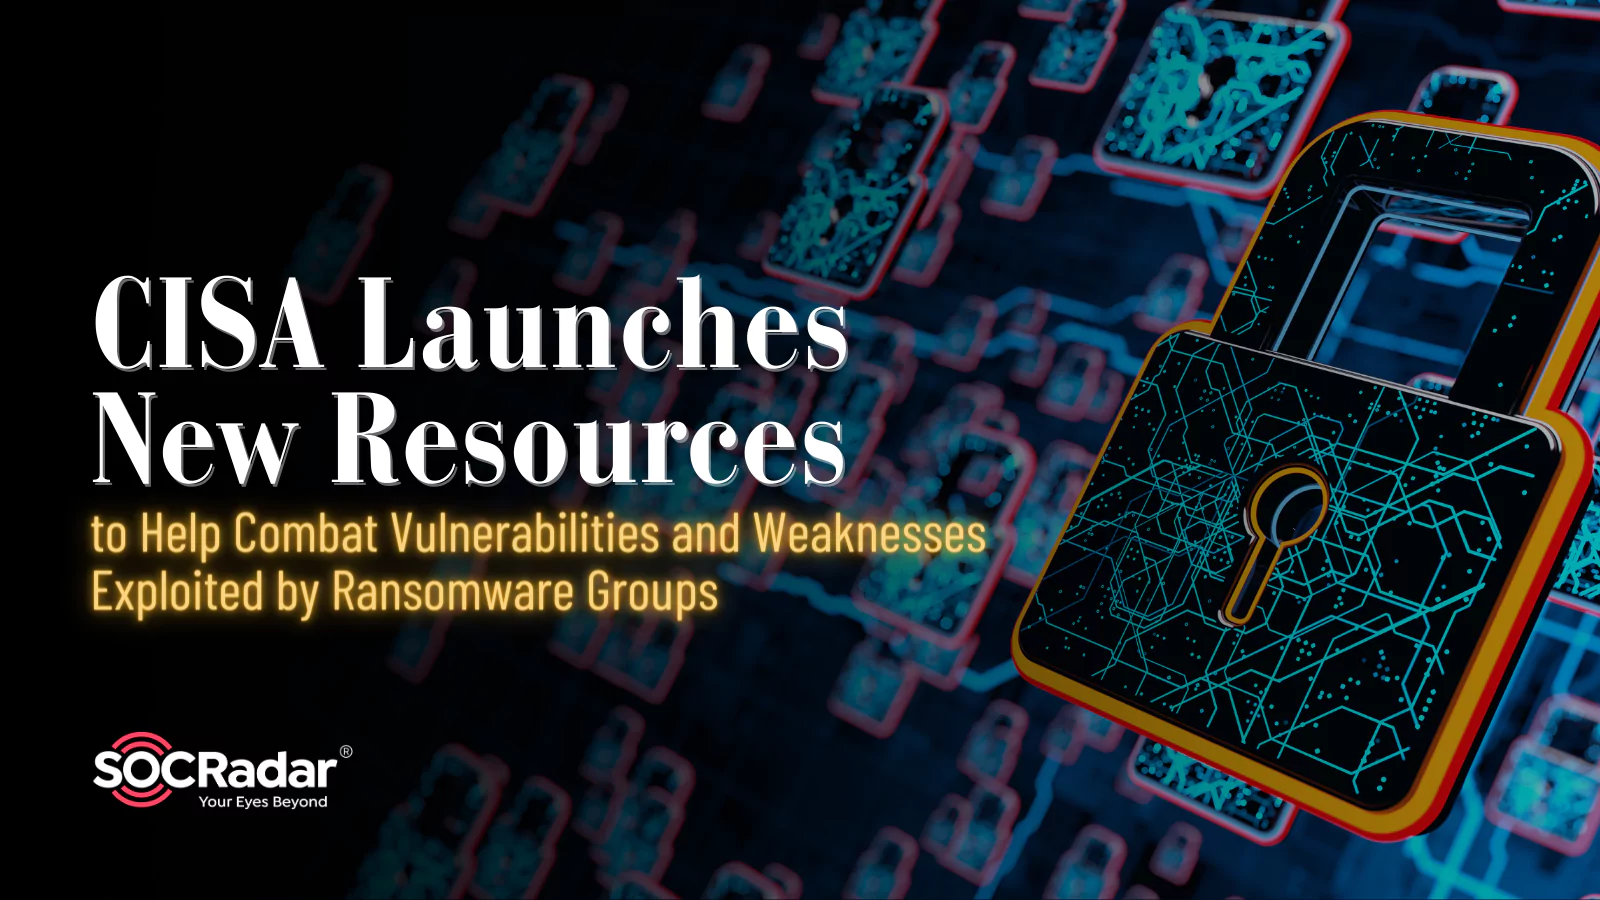 SOCRadar® Cyber Intelligence Inc. | CISA Launches New Resources to Help Combat Vulnerabilities and Weaknesses Exploited by Ransomware Groups